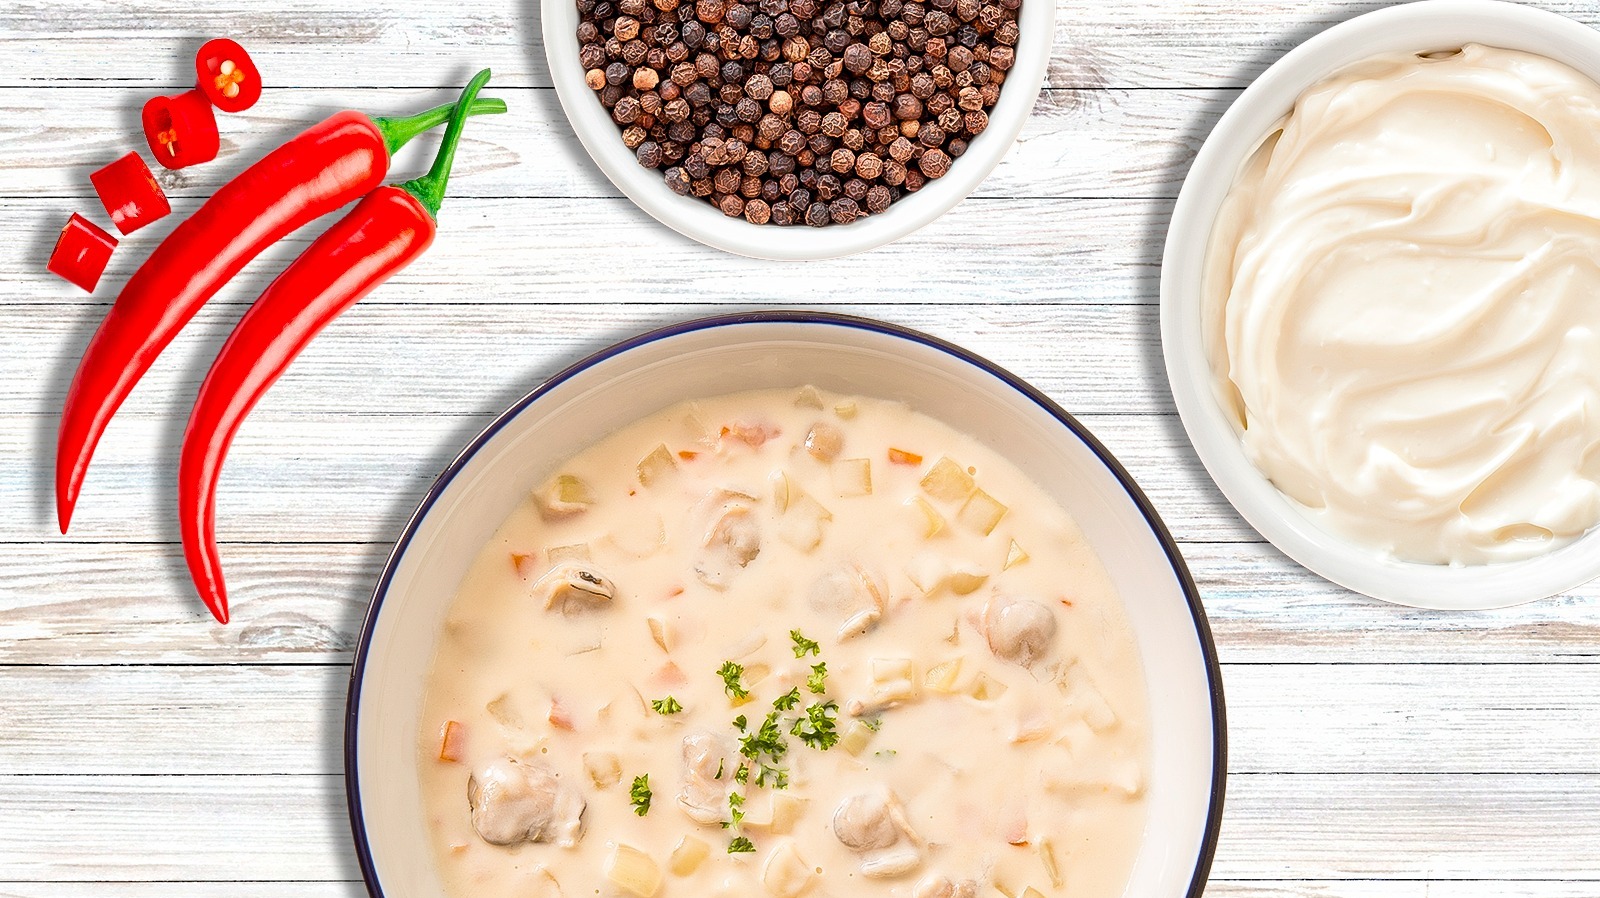 14 Ingredients To Add Flavor To Canned Clam Chowder - Tasting Table